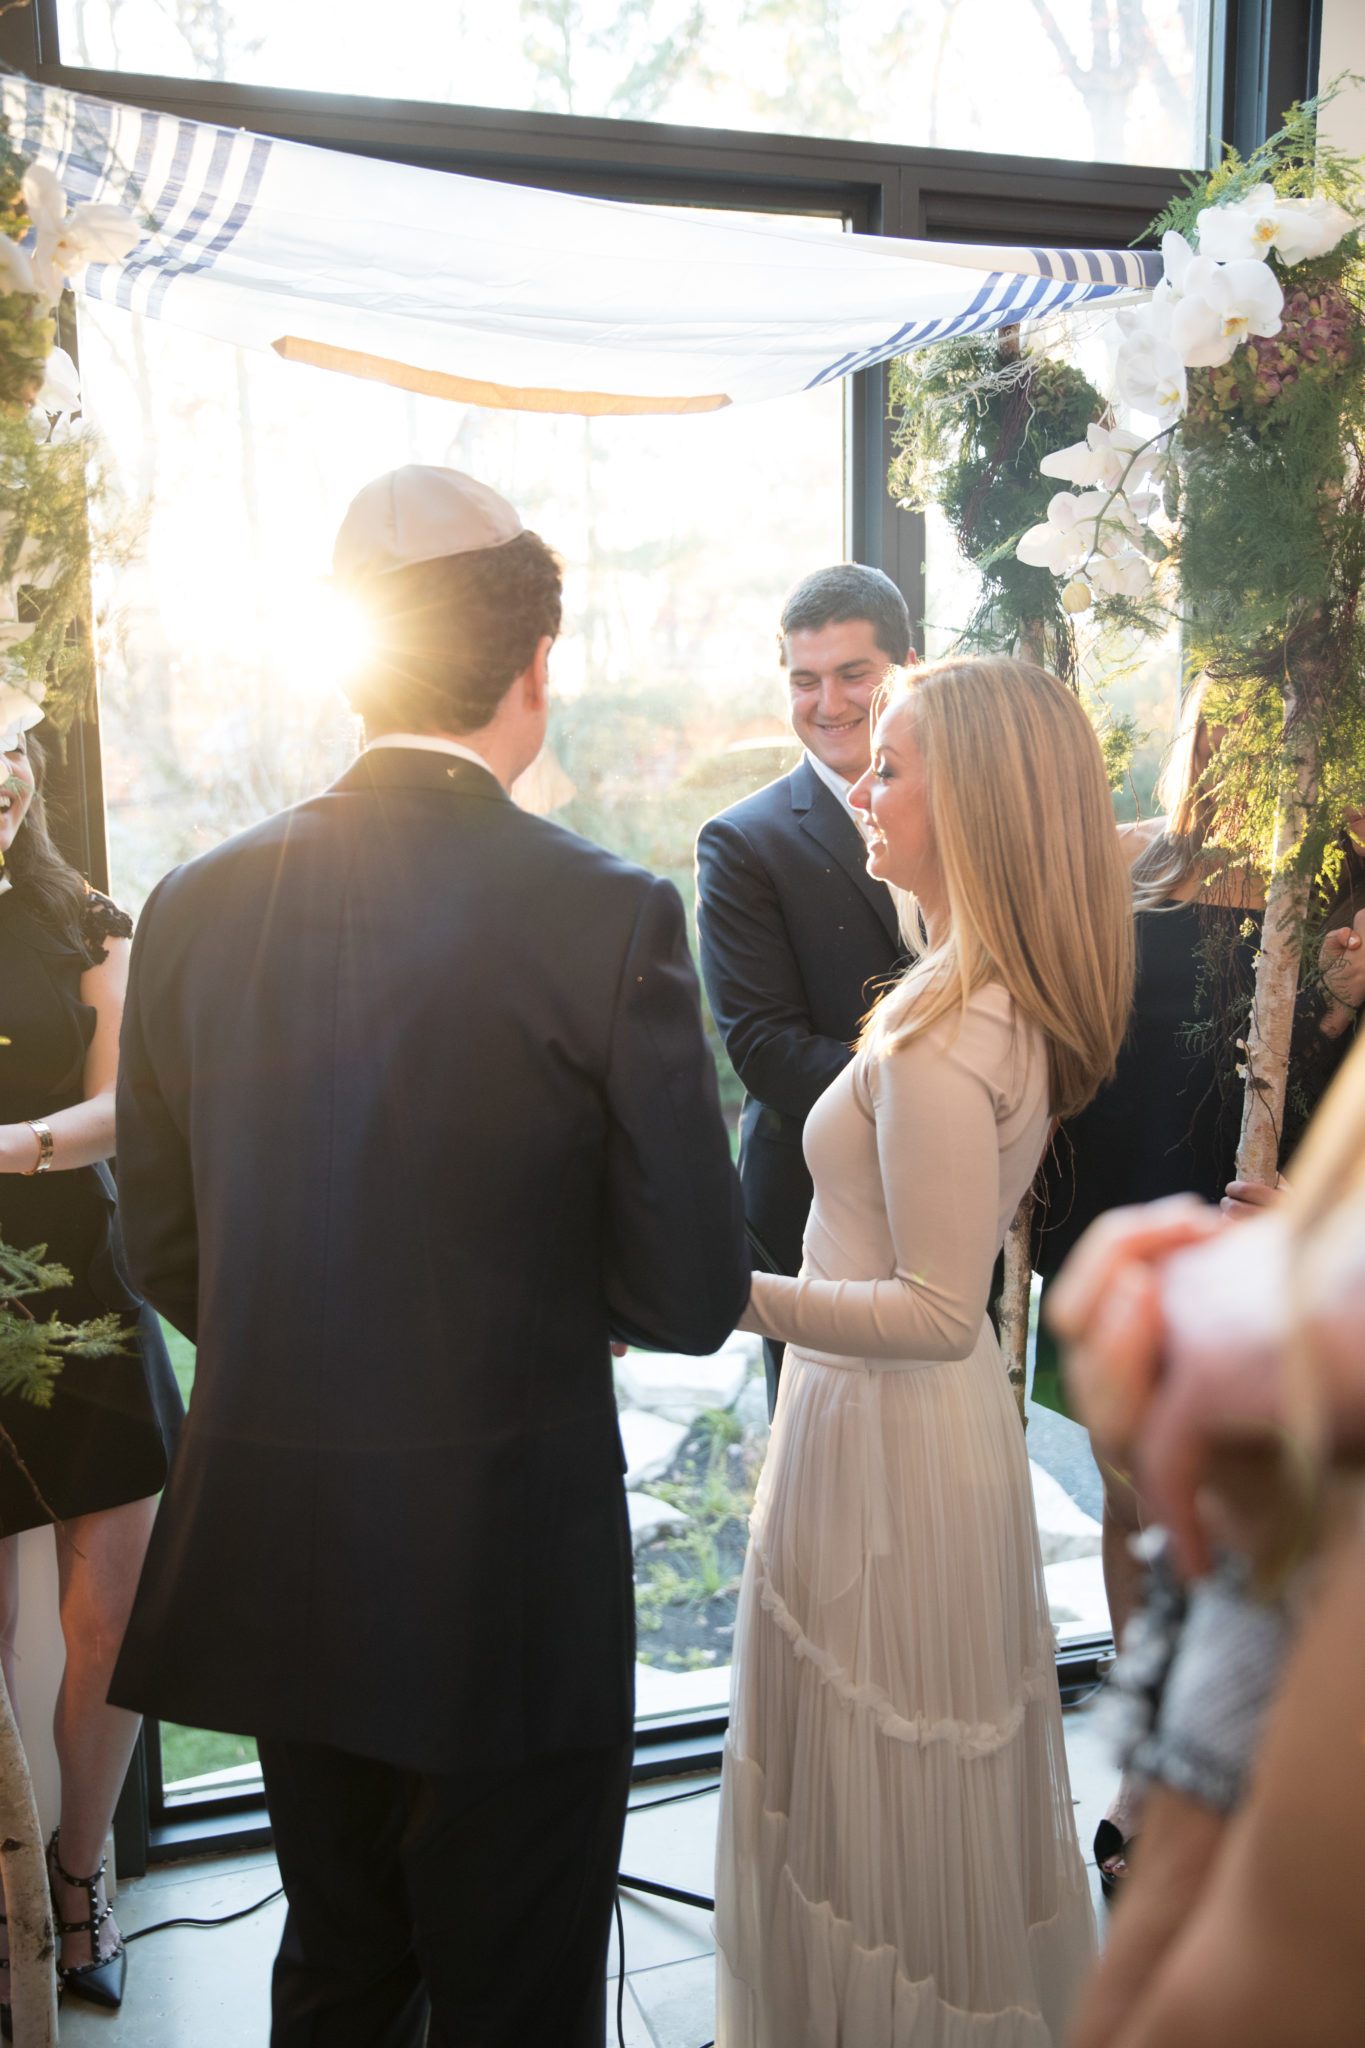 Hannah + Justin: An Intimate In-Home Wedding